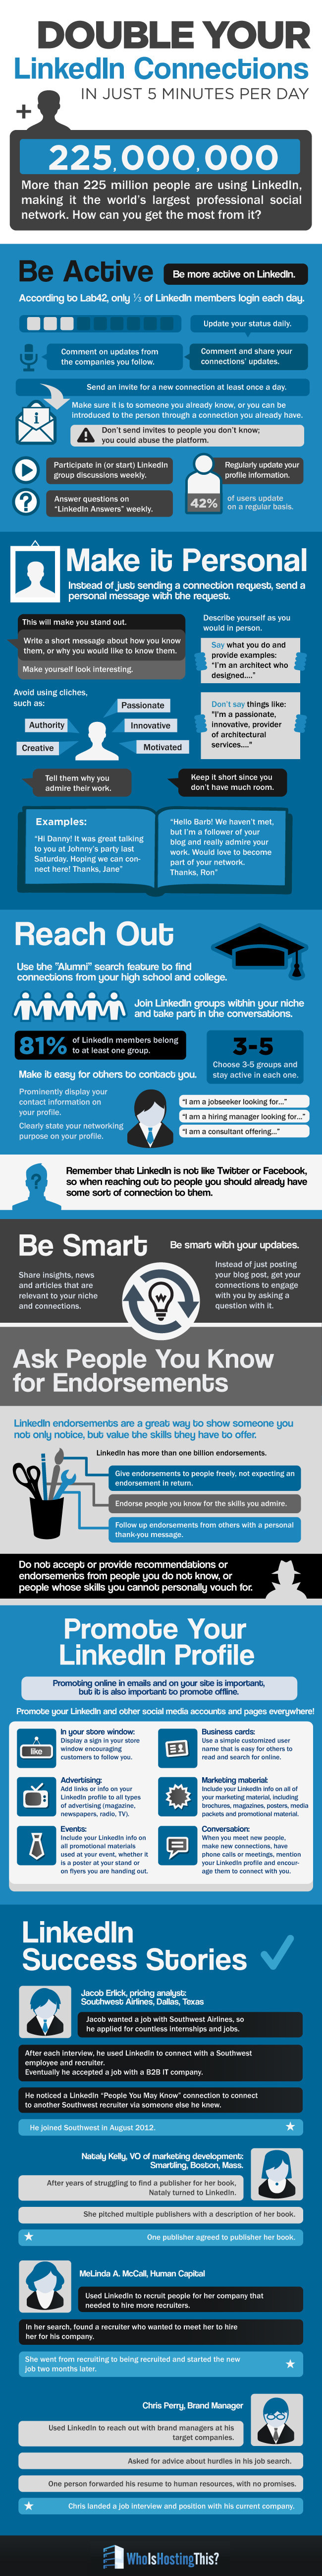 Double Your LinkedIn Connections